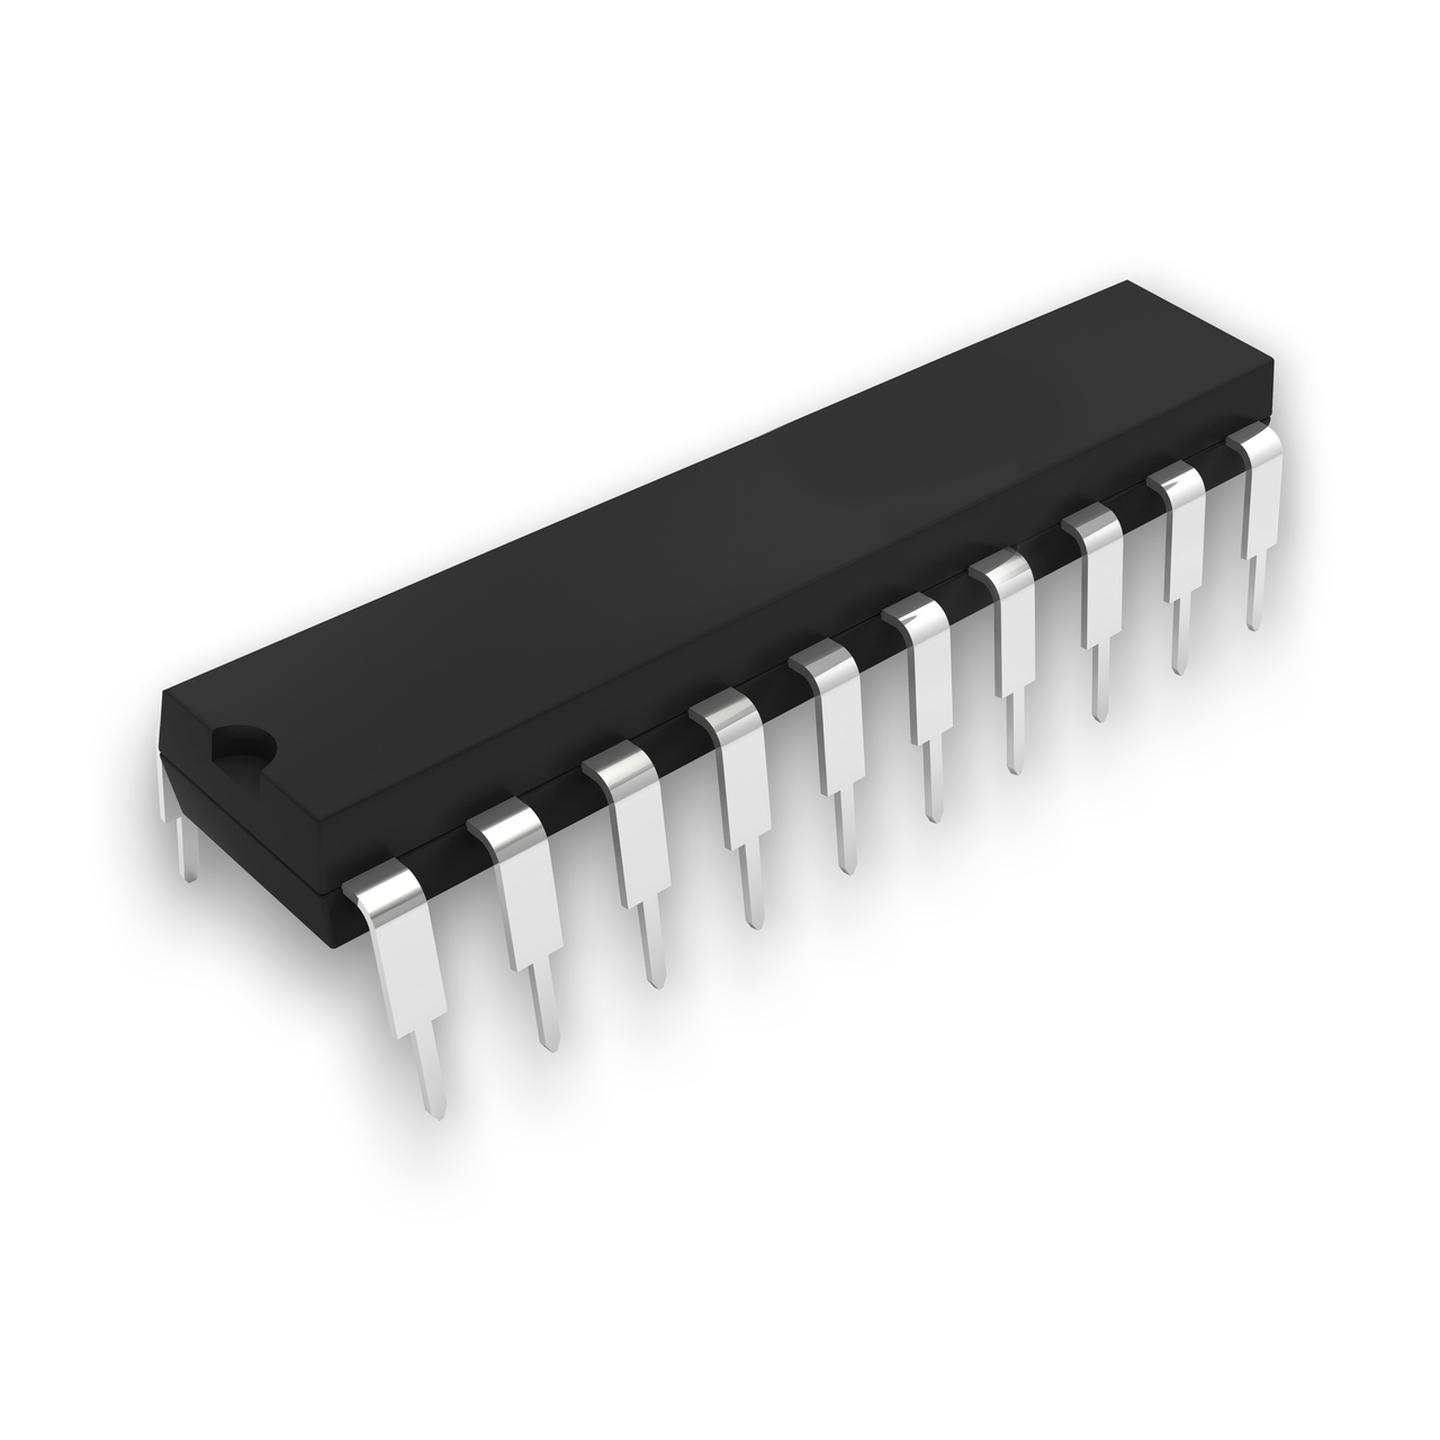 74LS373 Octal Transparent 3 state  Latch low power Schottky IC